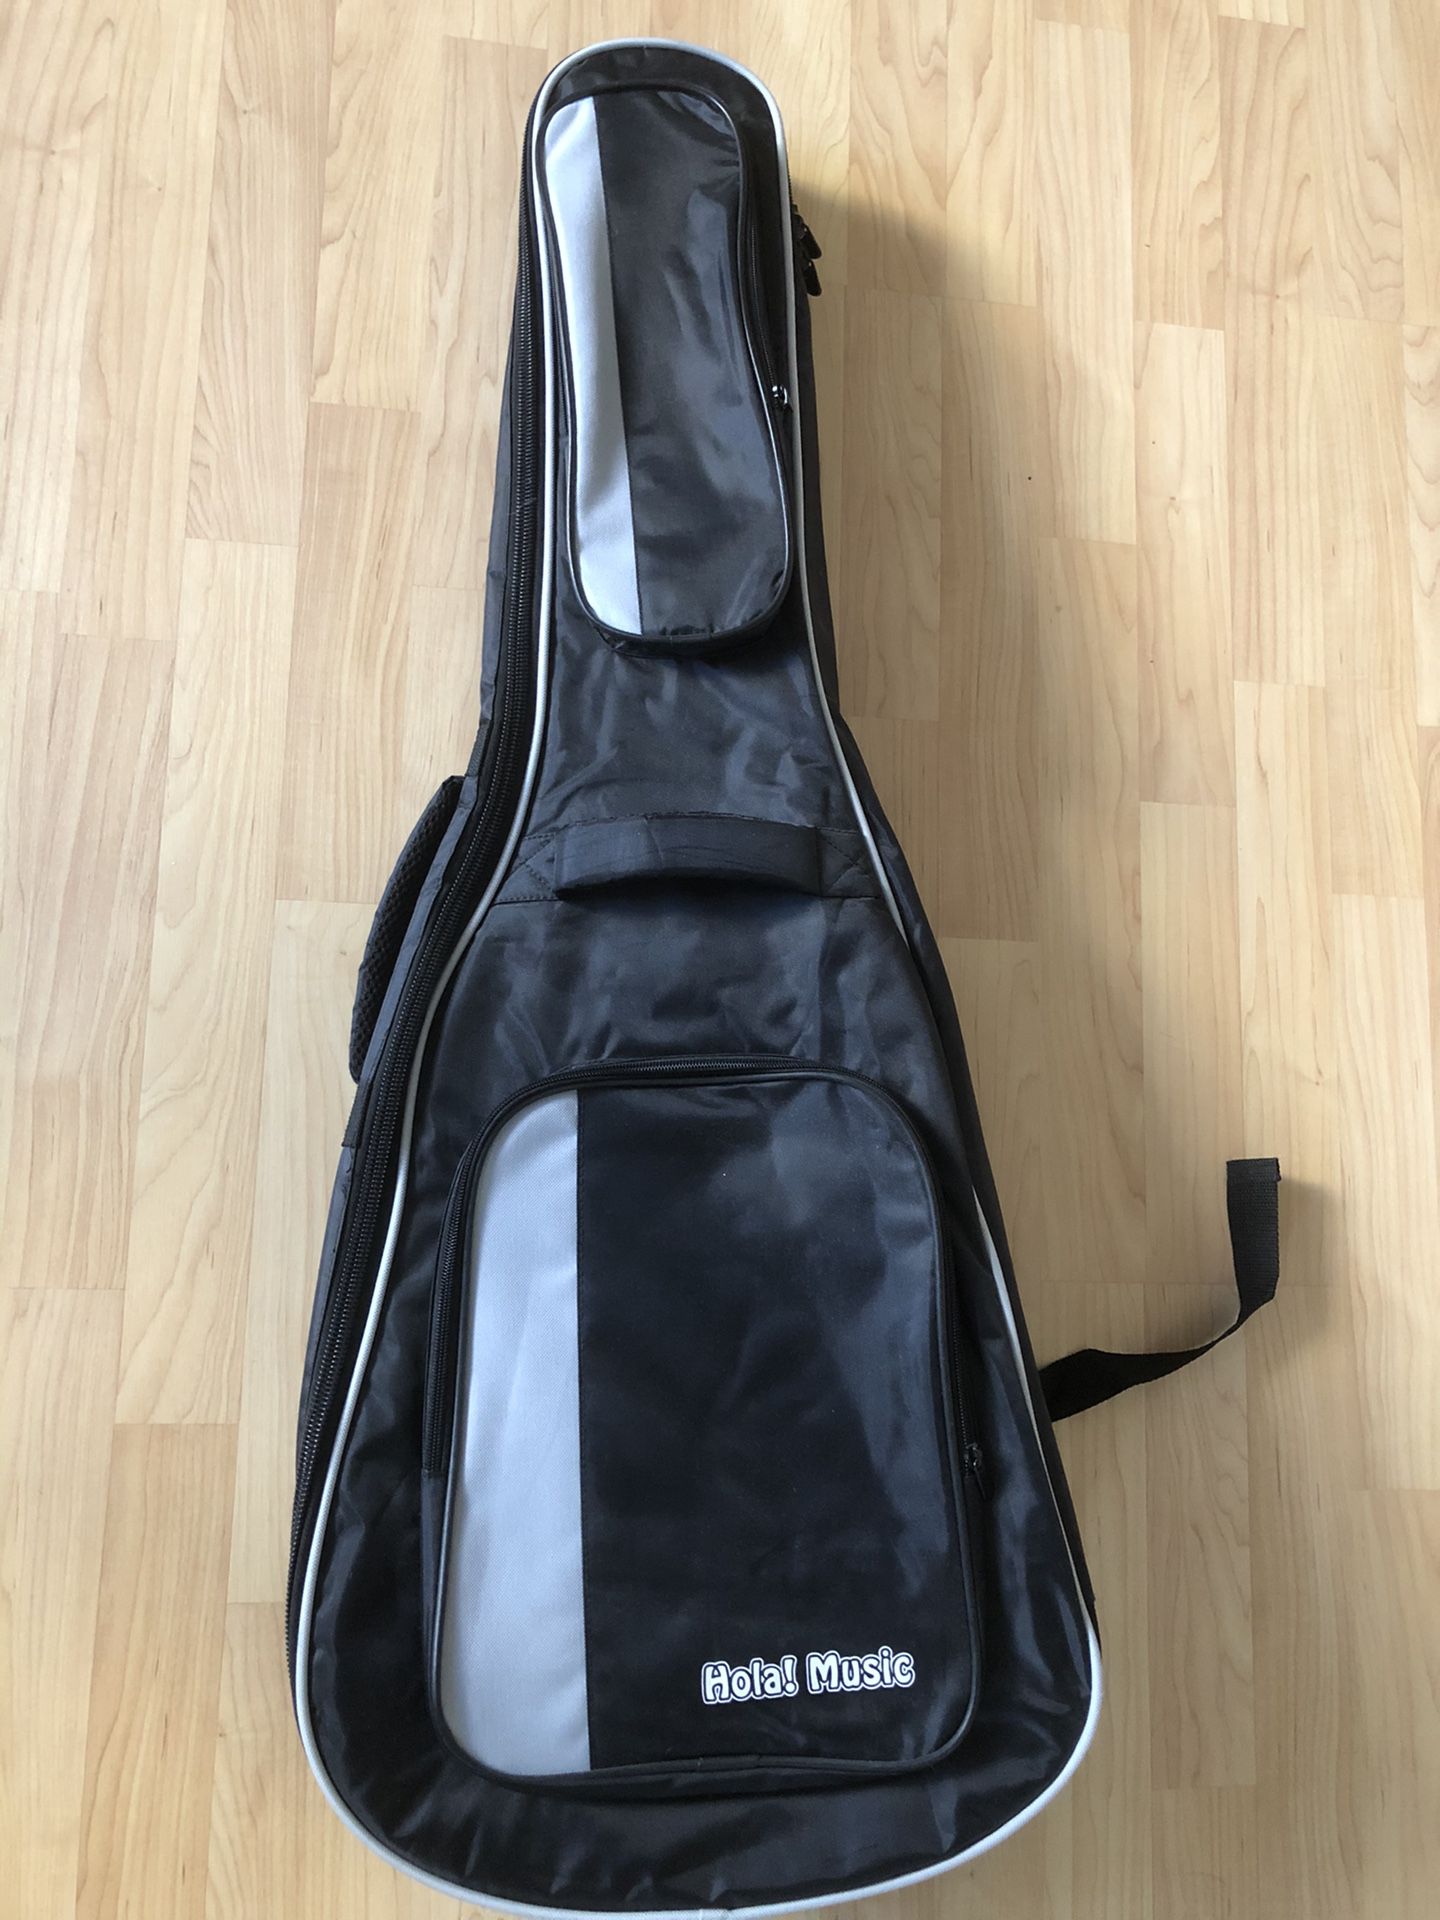 Acoustic and Classical Guitars Gig Bag 3/4 Size (36 inch) by Hola! Music, Deluxe Series with 15mm Padding, Black